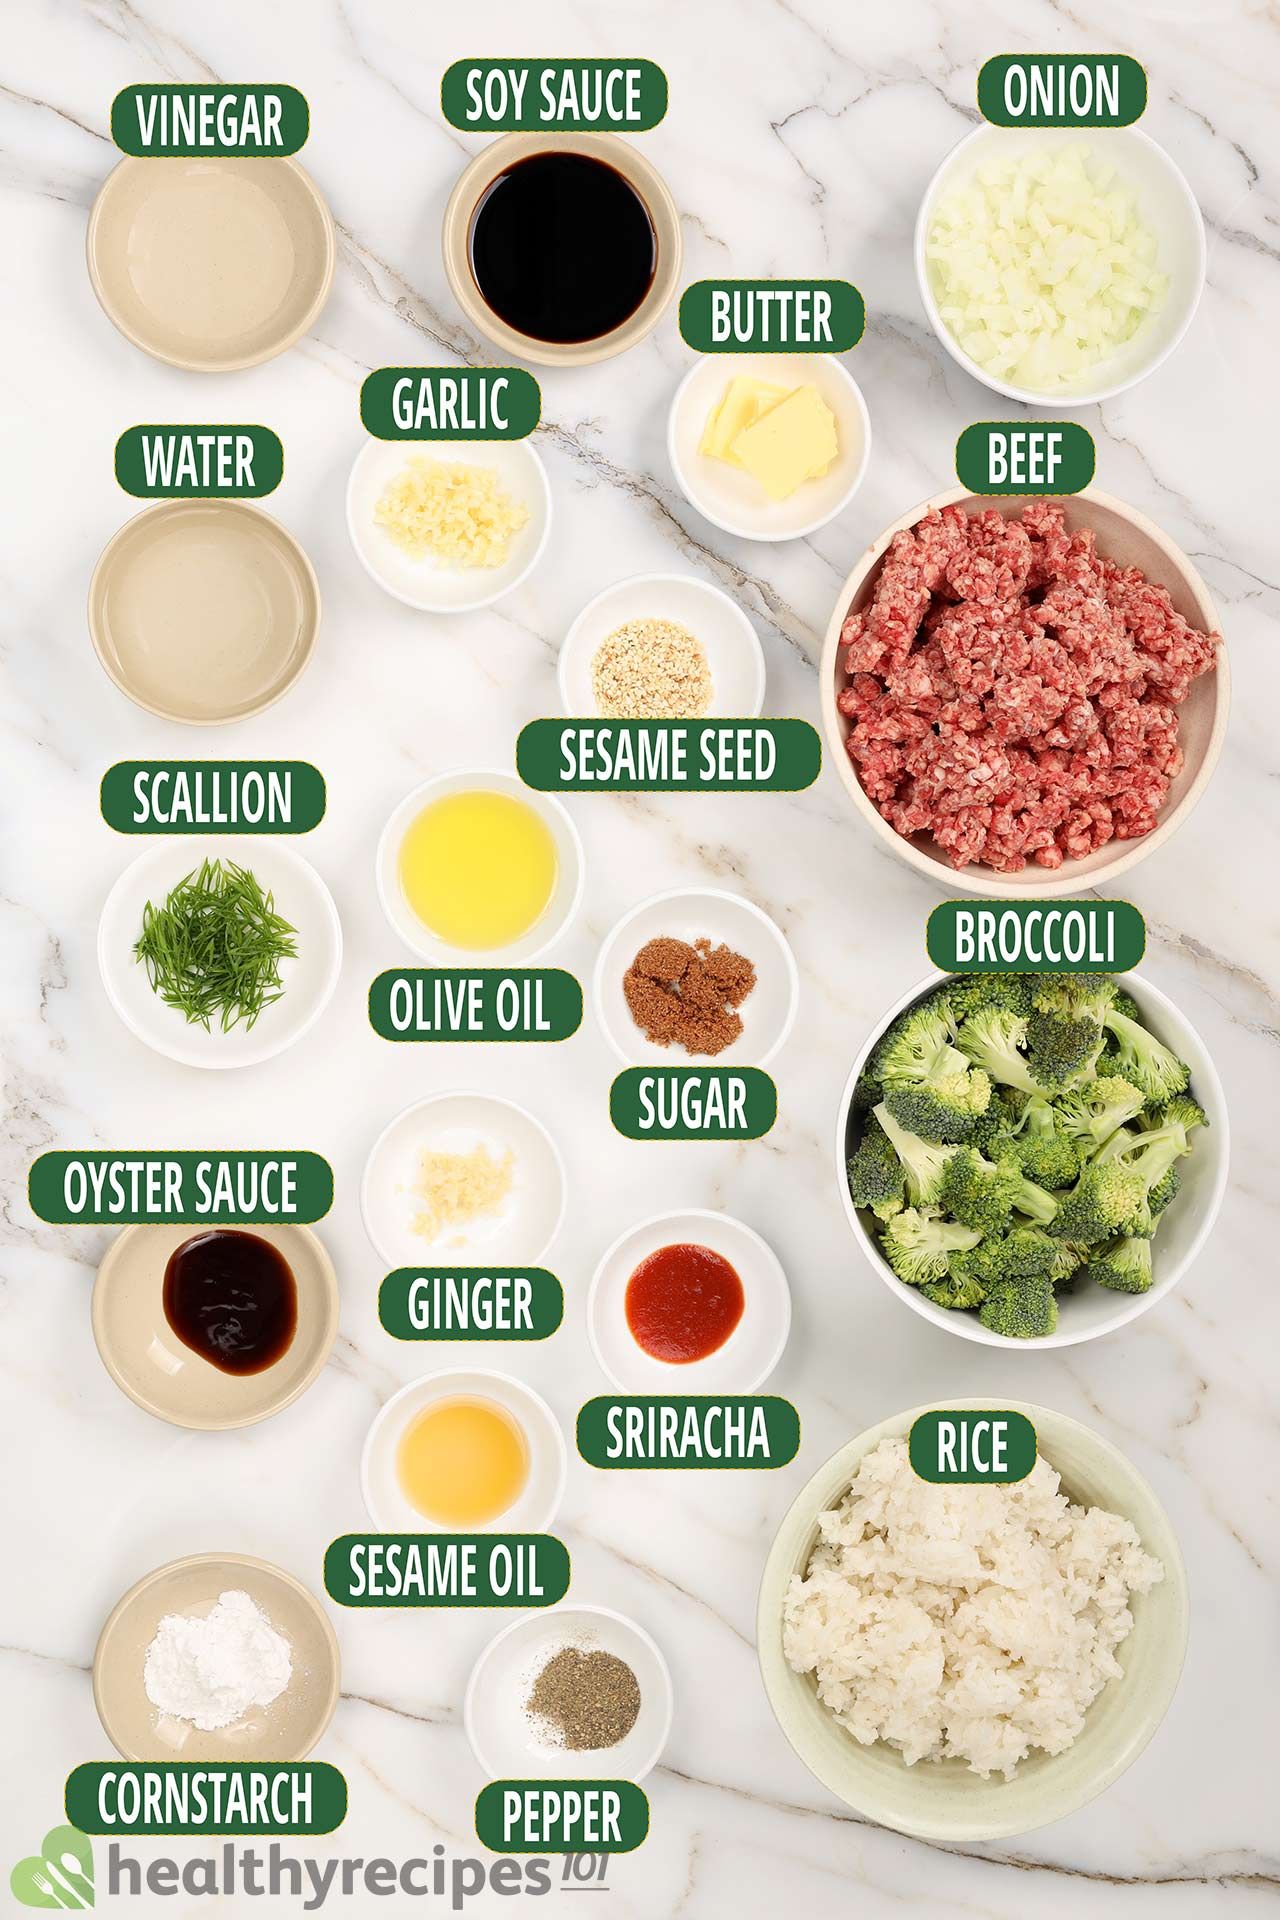 Ground Beef And Broccoli Ingredients